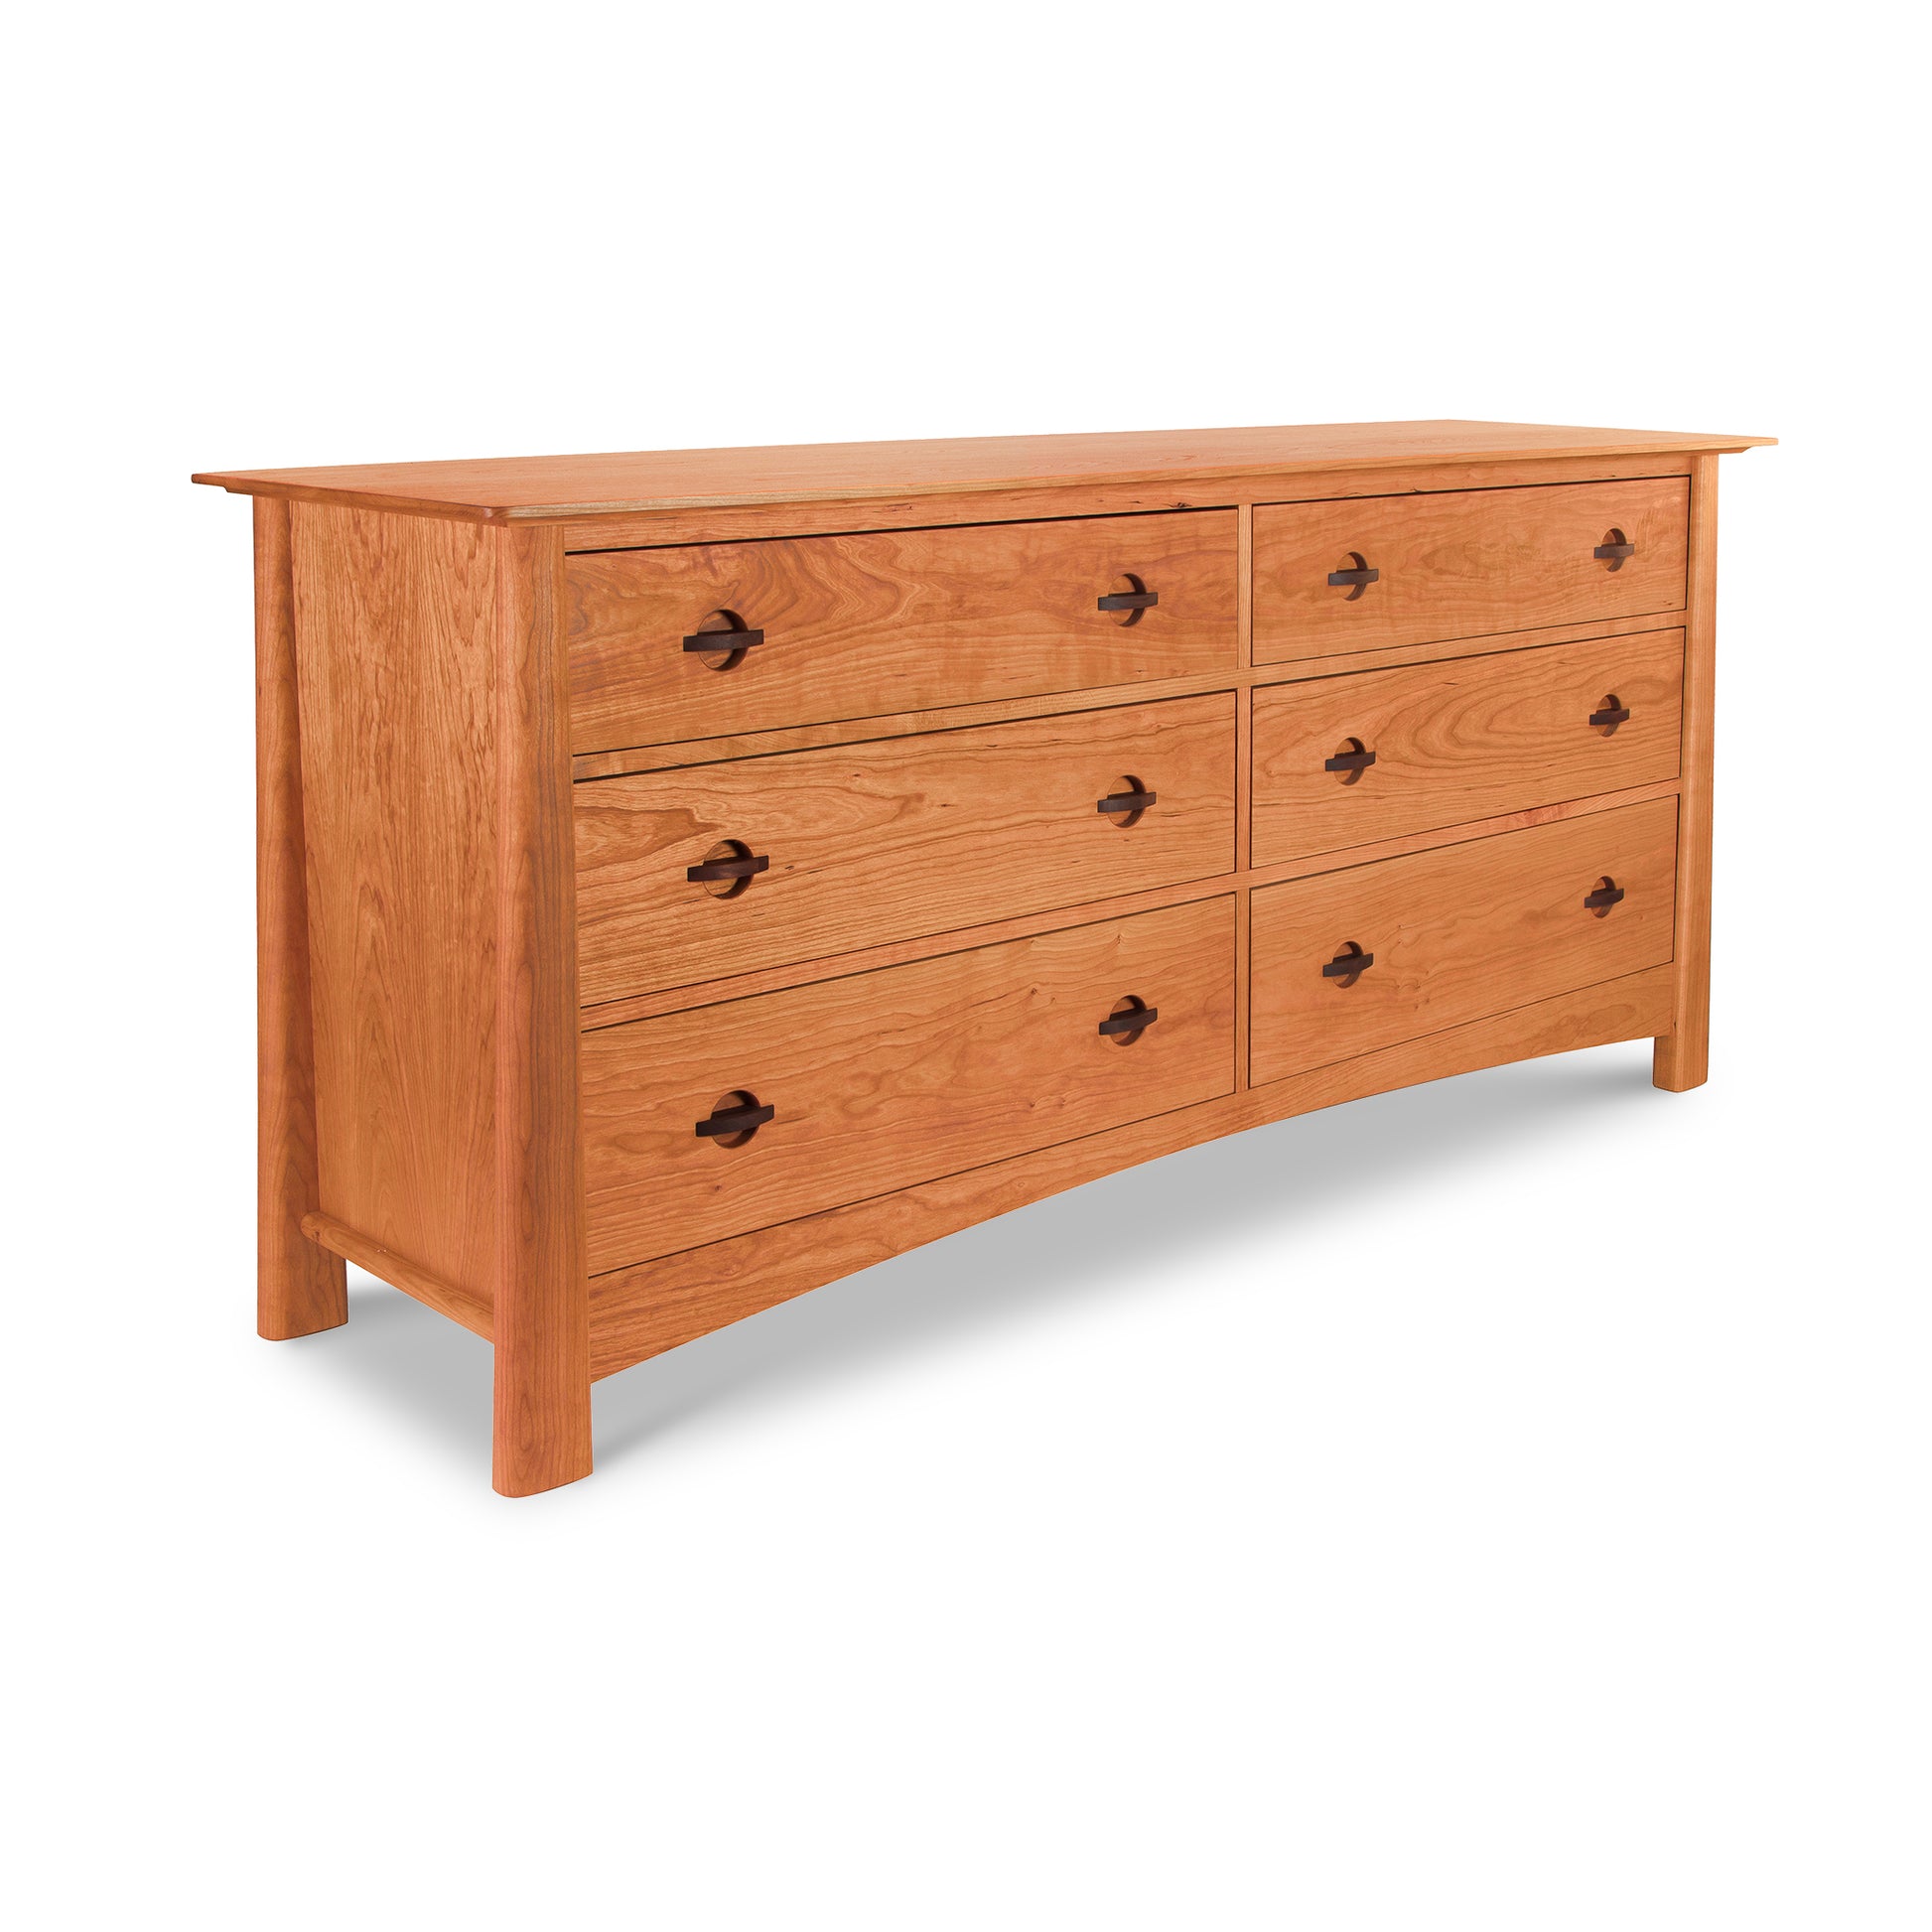 Alt text: Solid Cherry Wood 6-Drawer Dresser from Maple Corner Woodworks featuring black, leaf-shaped handles, eco-friendly design with natural wooden finish, perfect for American made and Vermont made furniture collections.